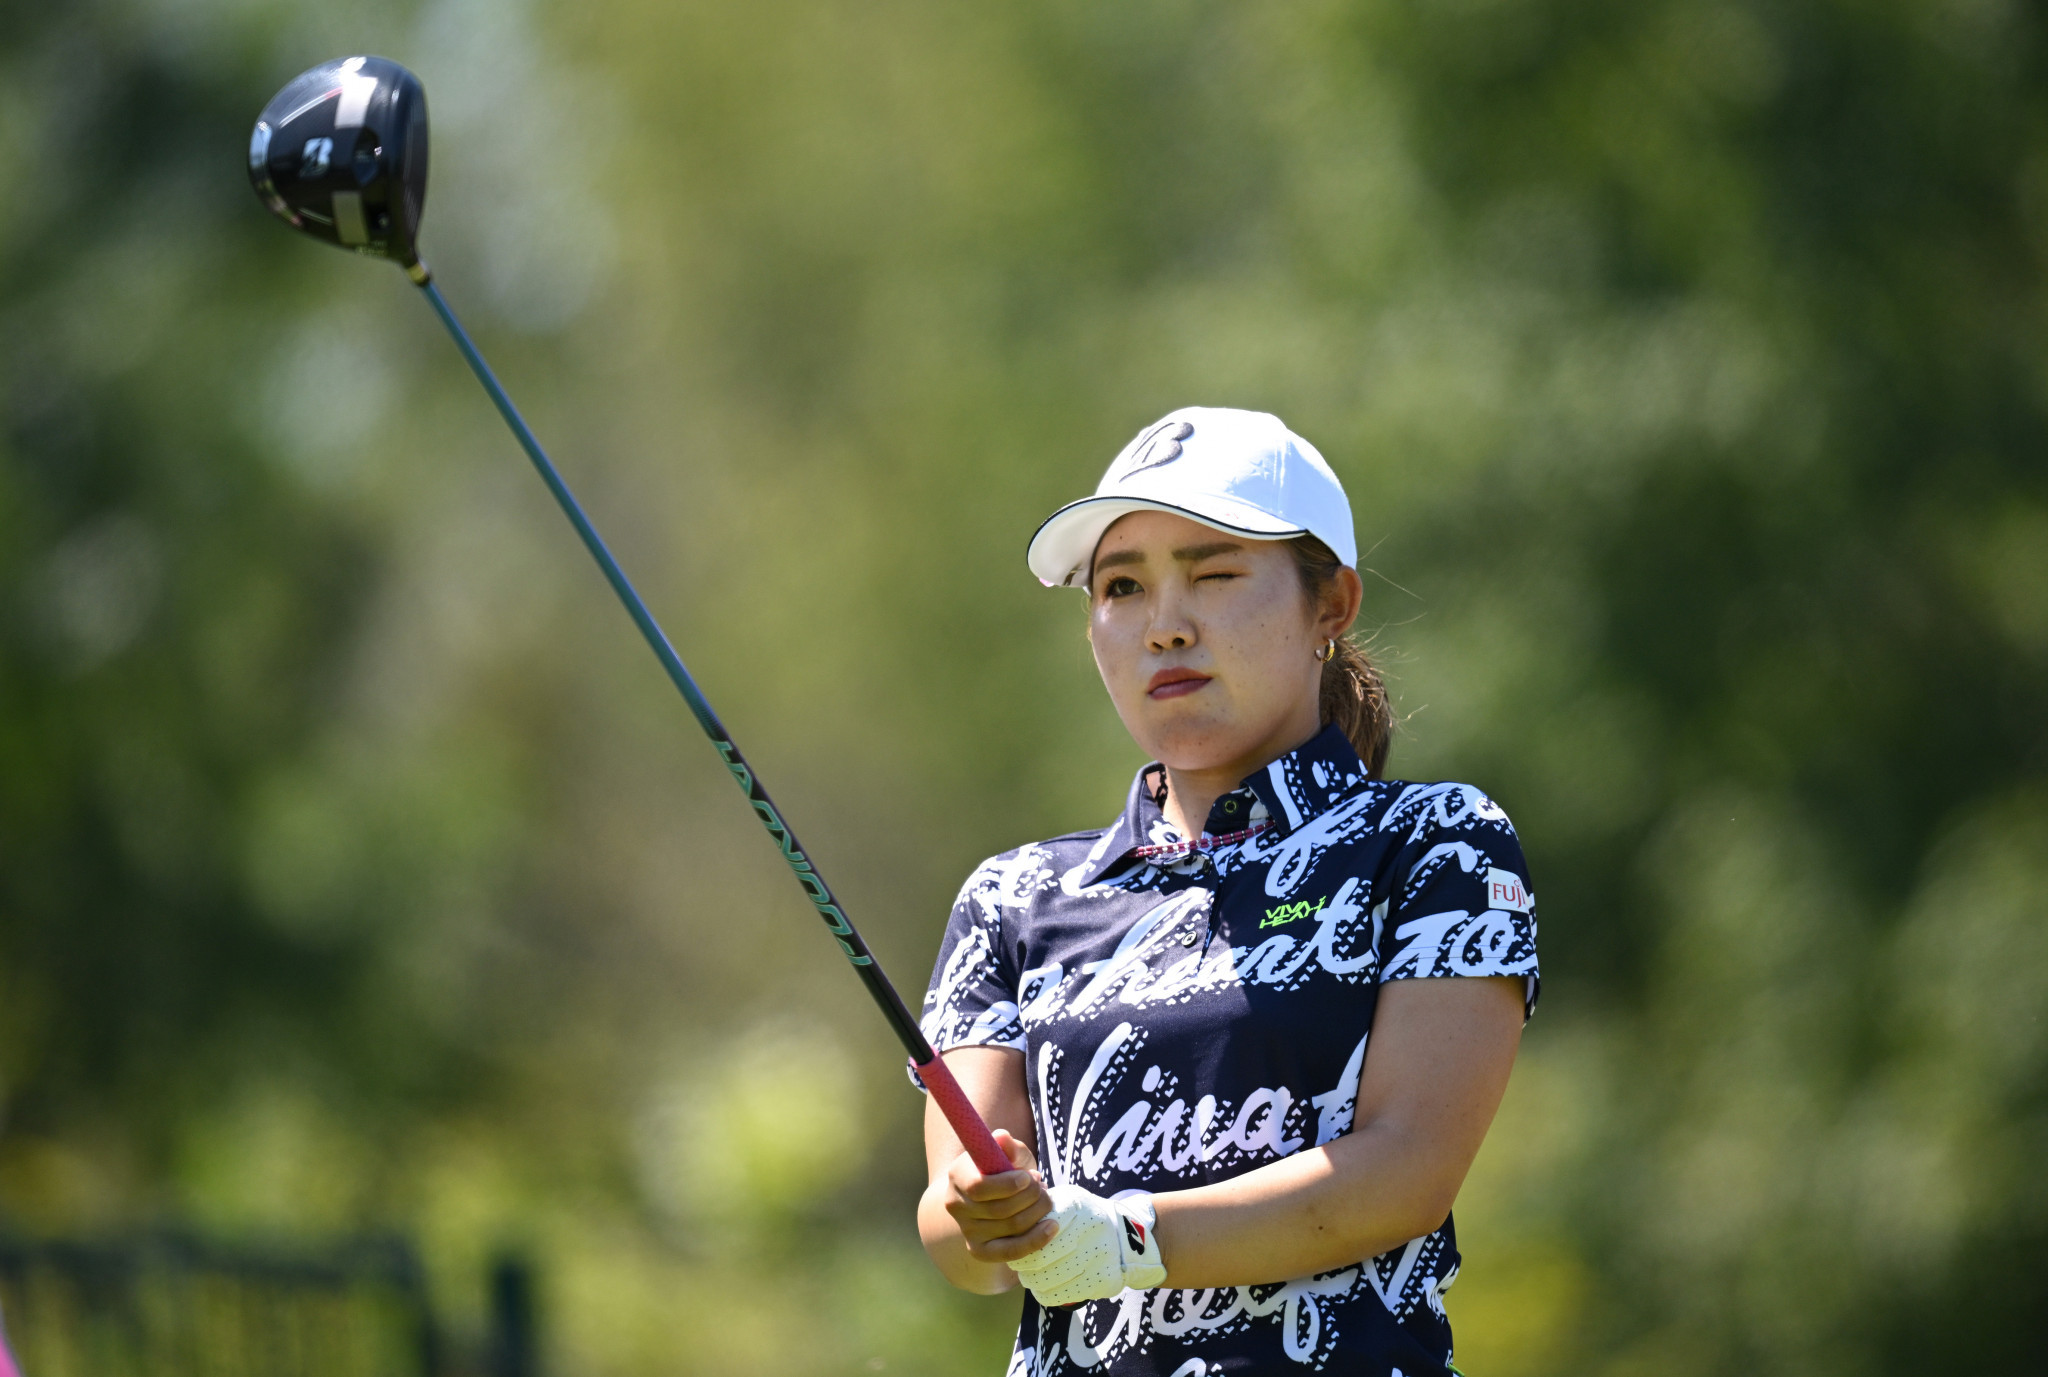 Furue leads Evian Championship after opening day